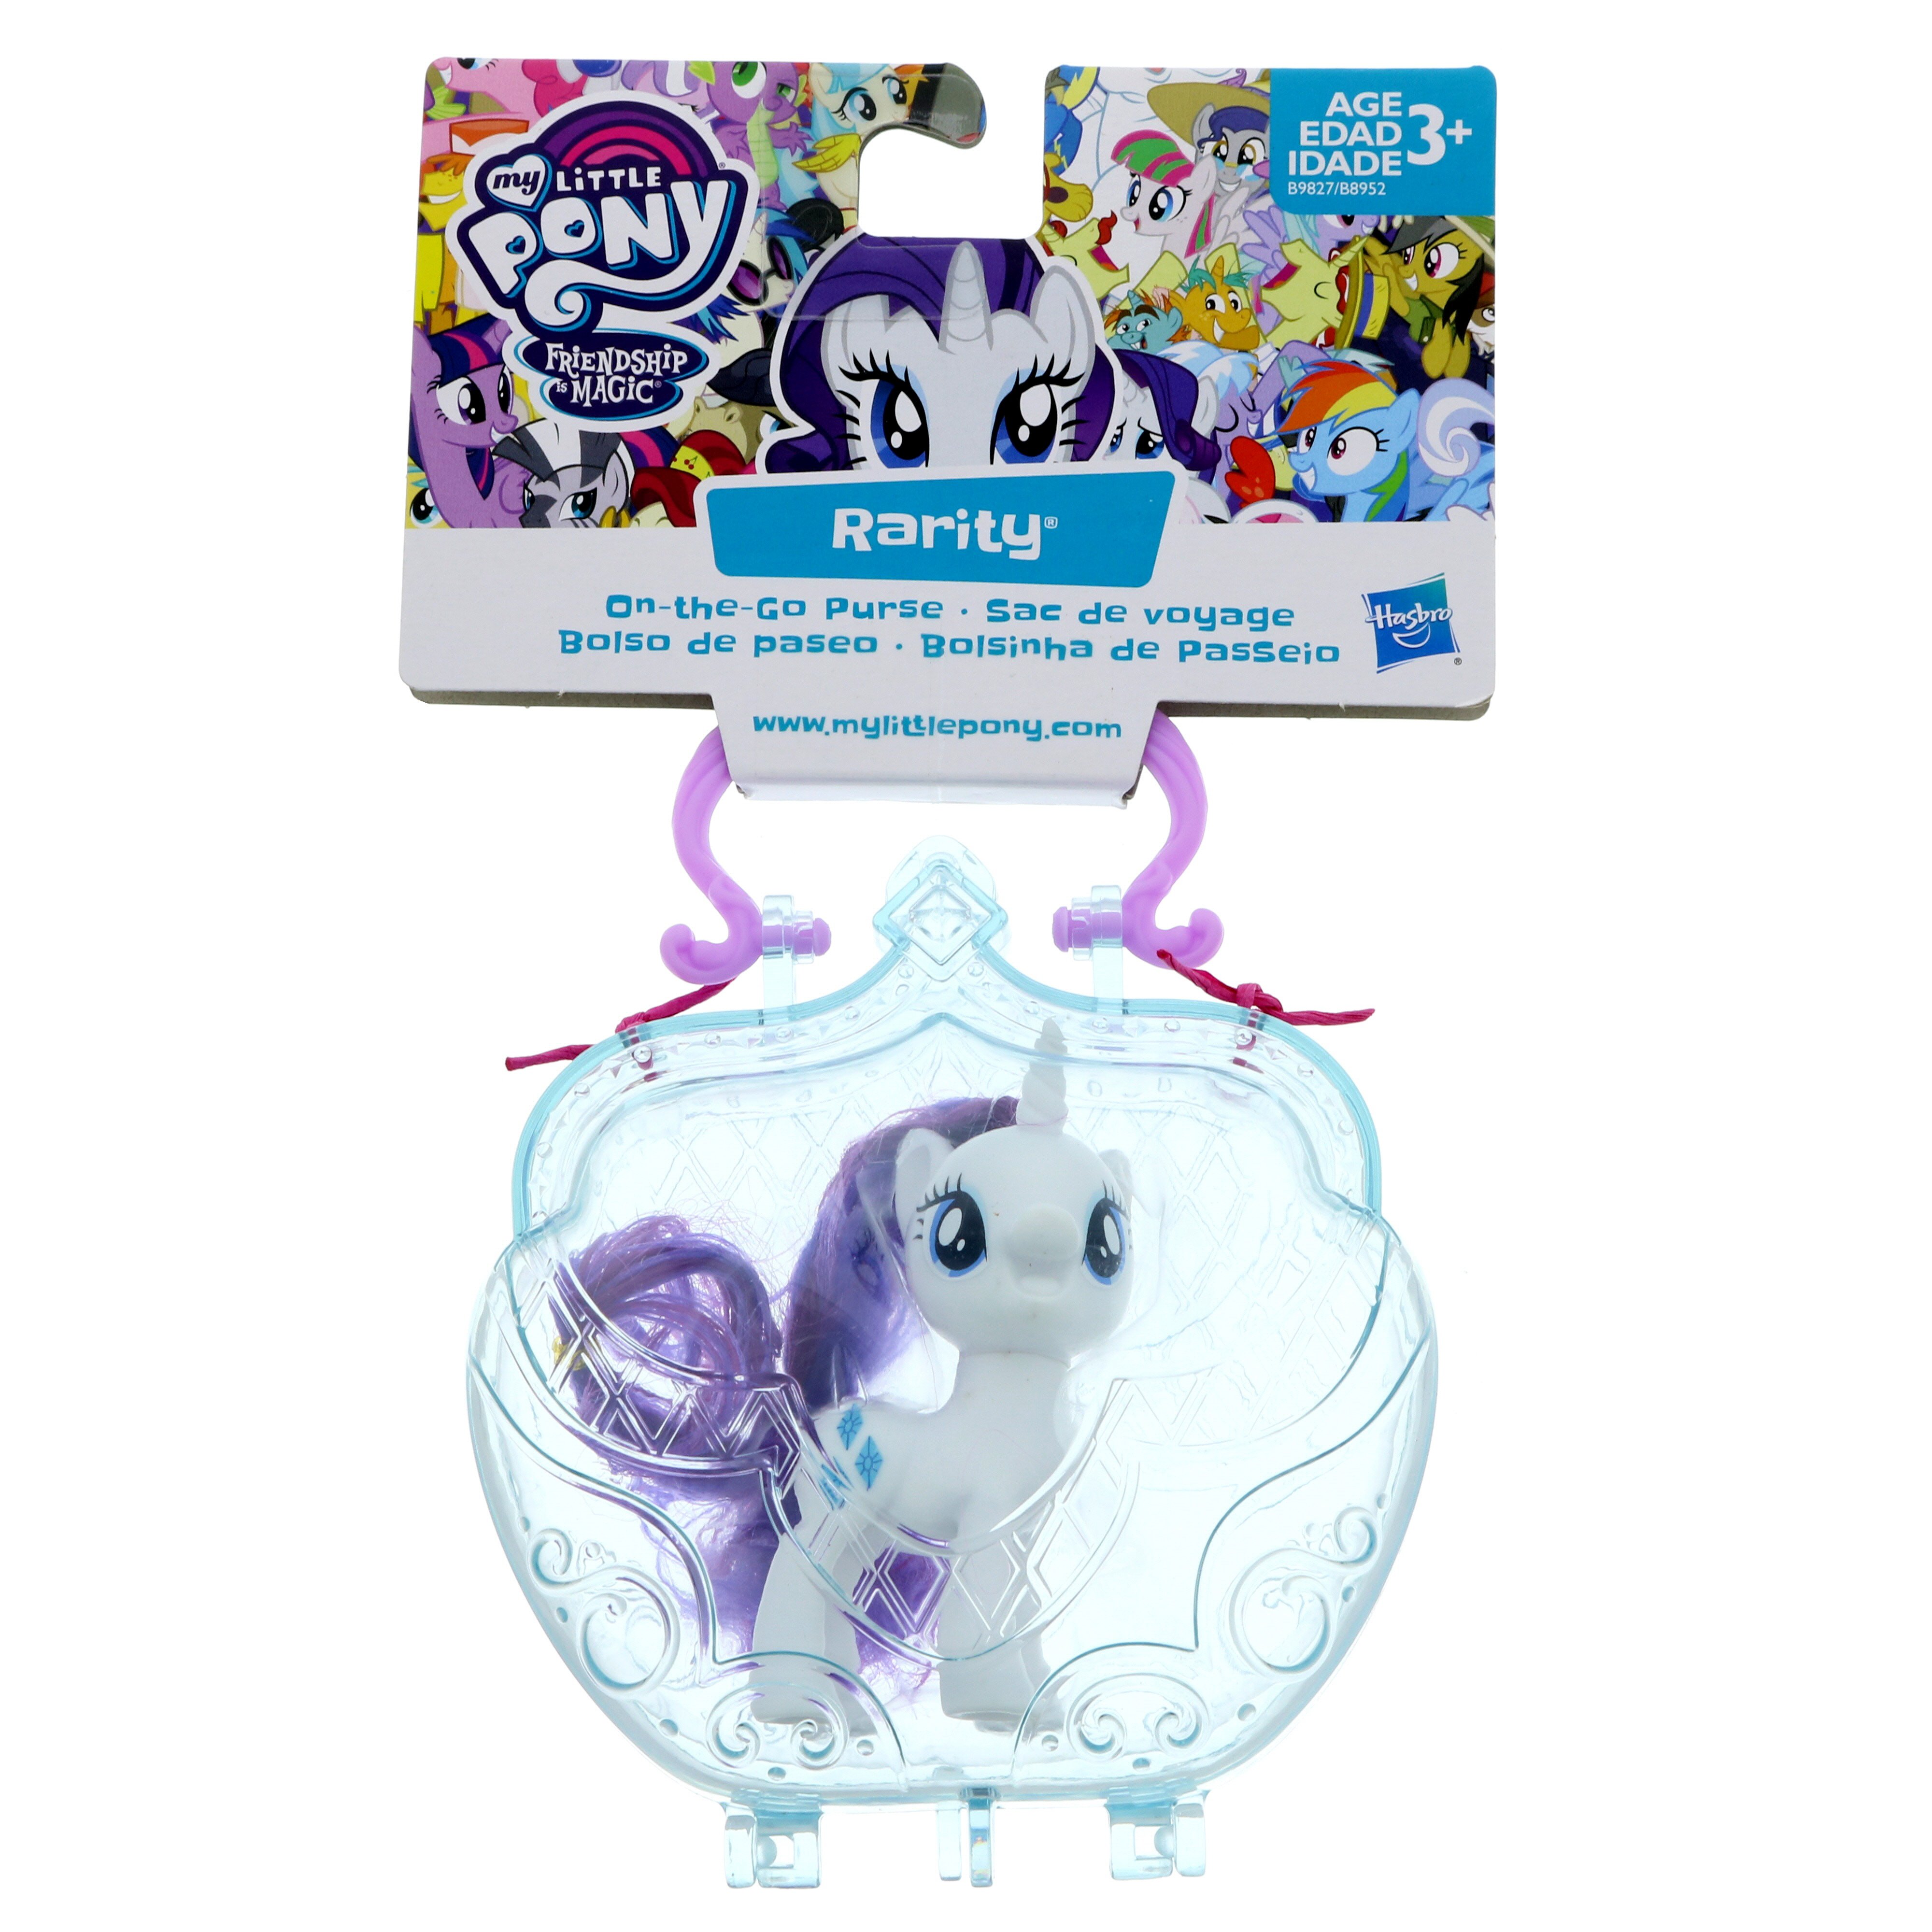 my little pony on the go purse